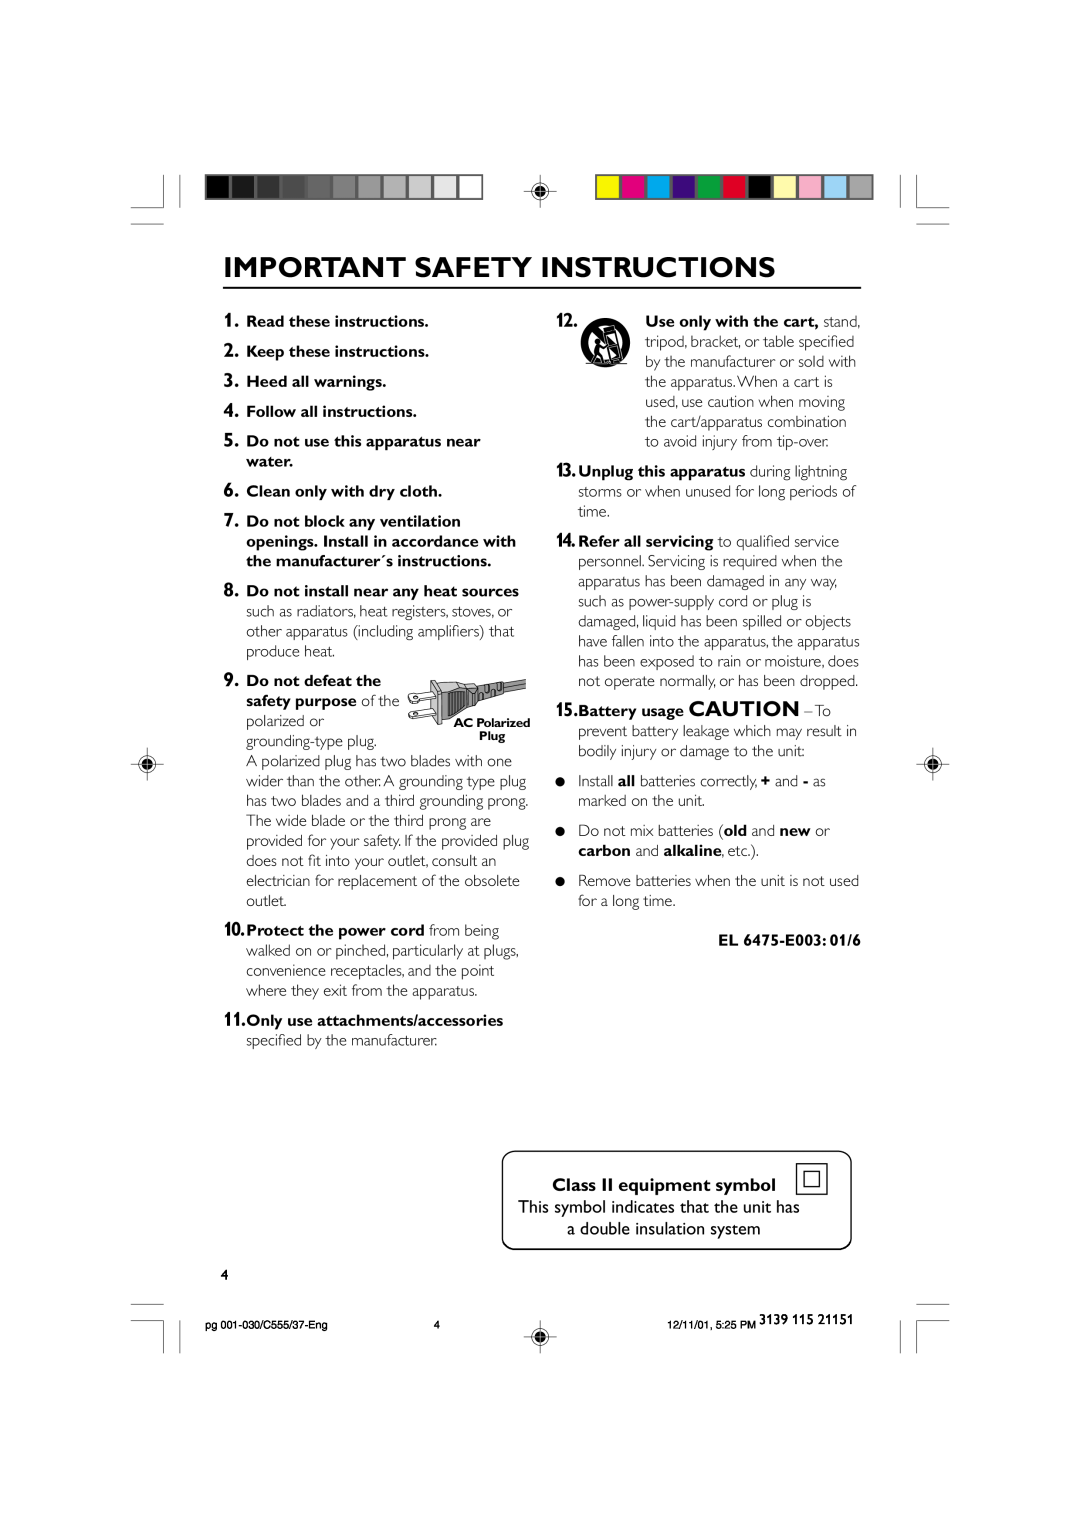 NAD FWC555 warranty Class II equipment symbol, Important Safety Instructions 